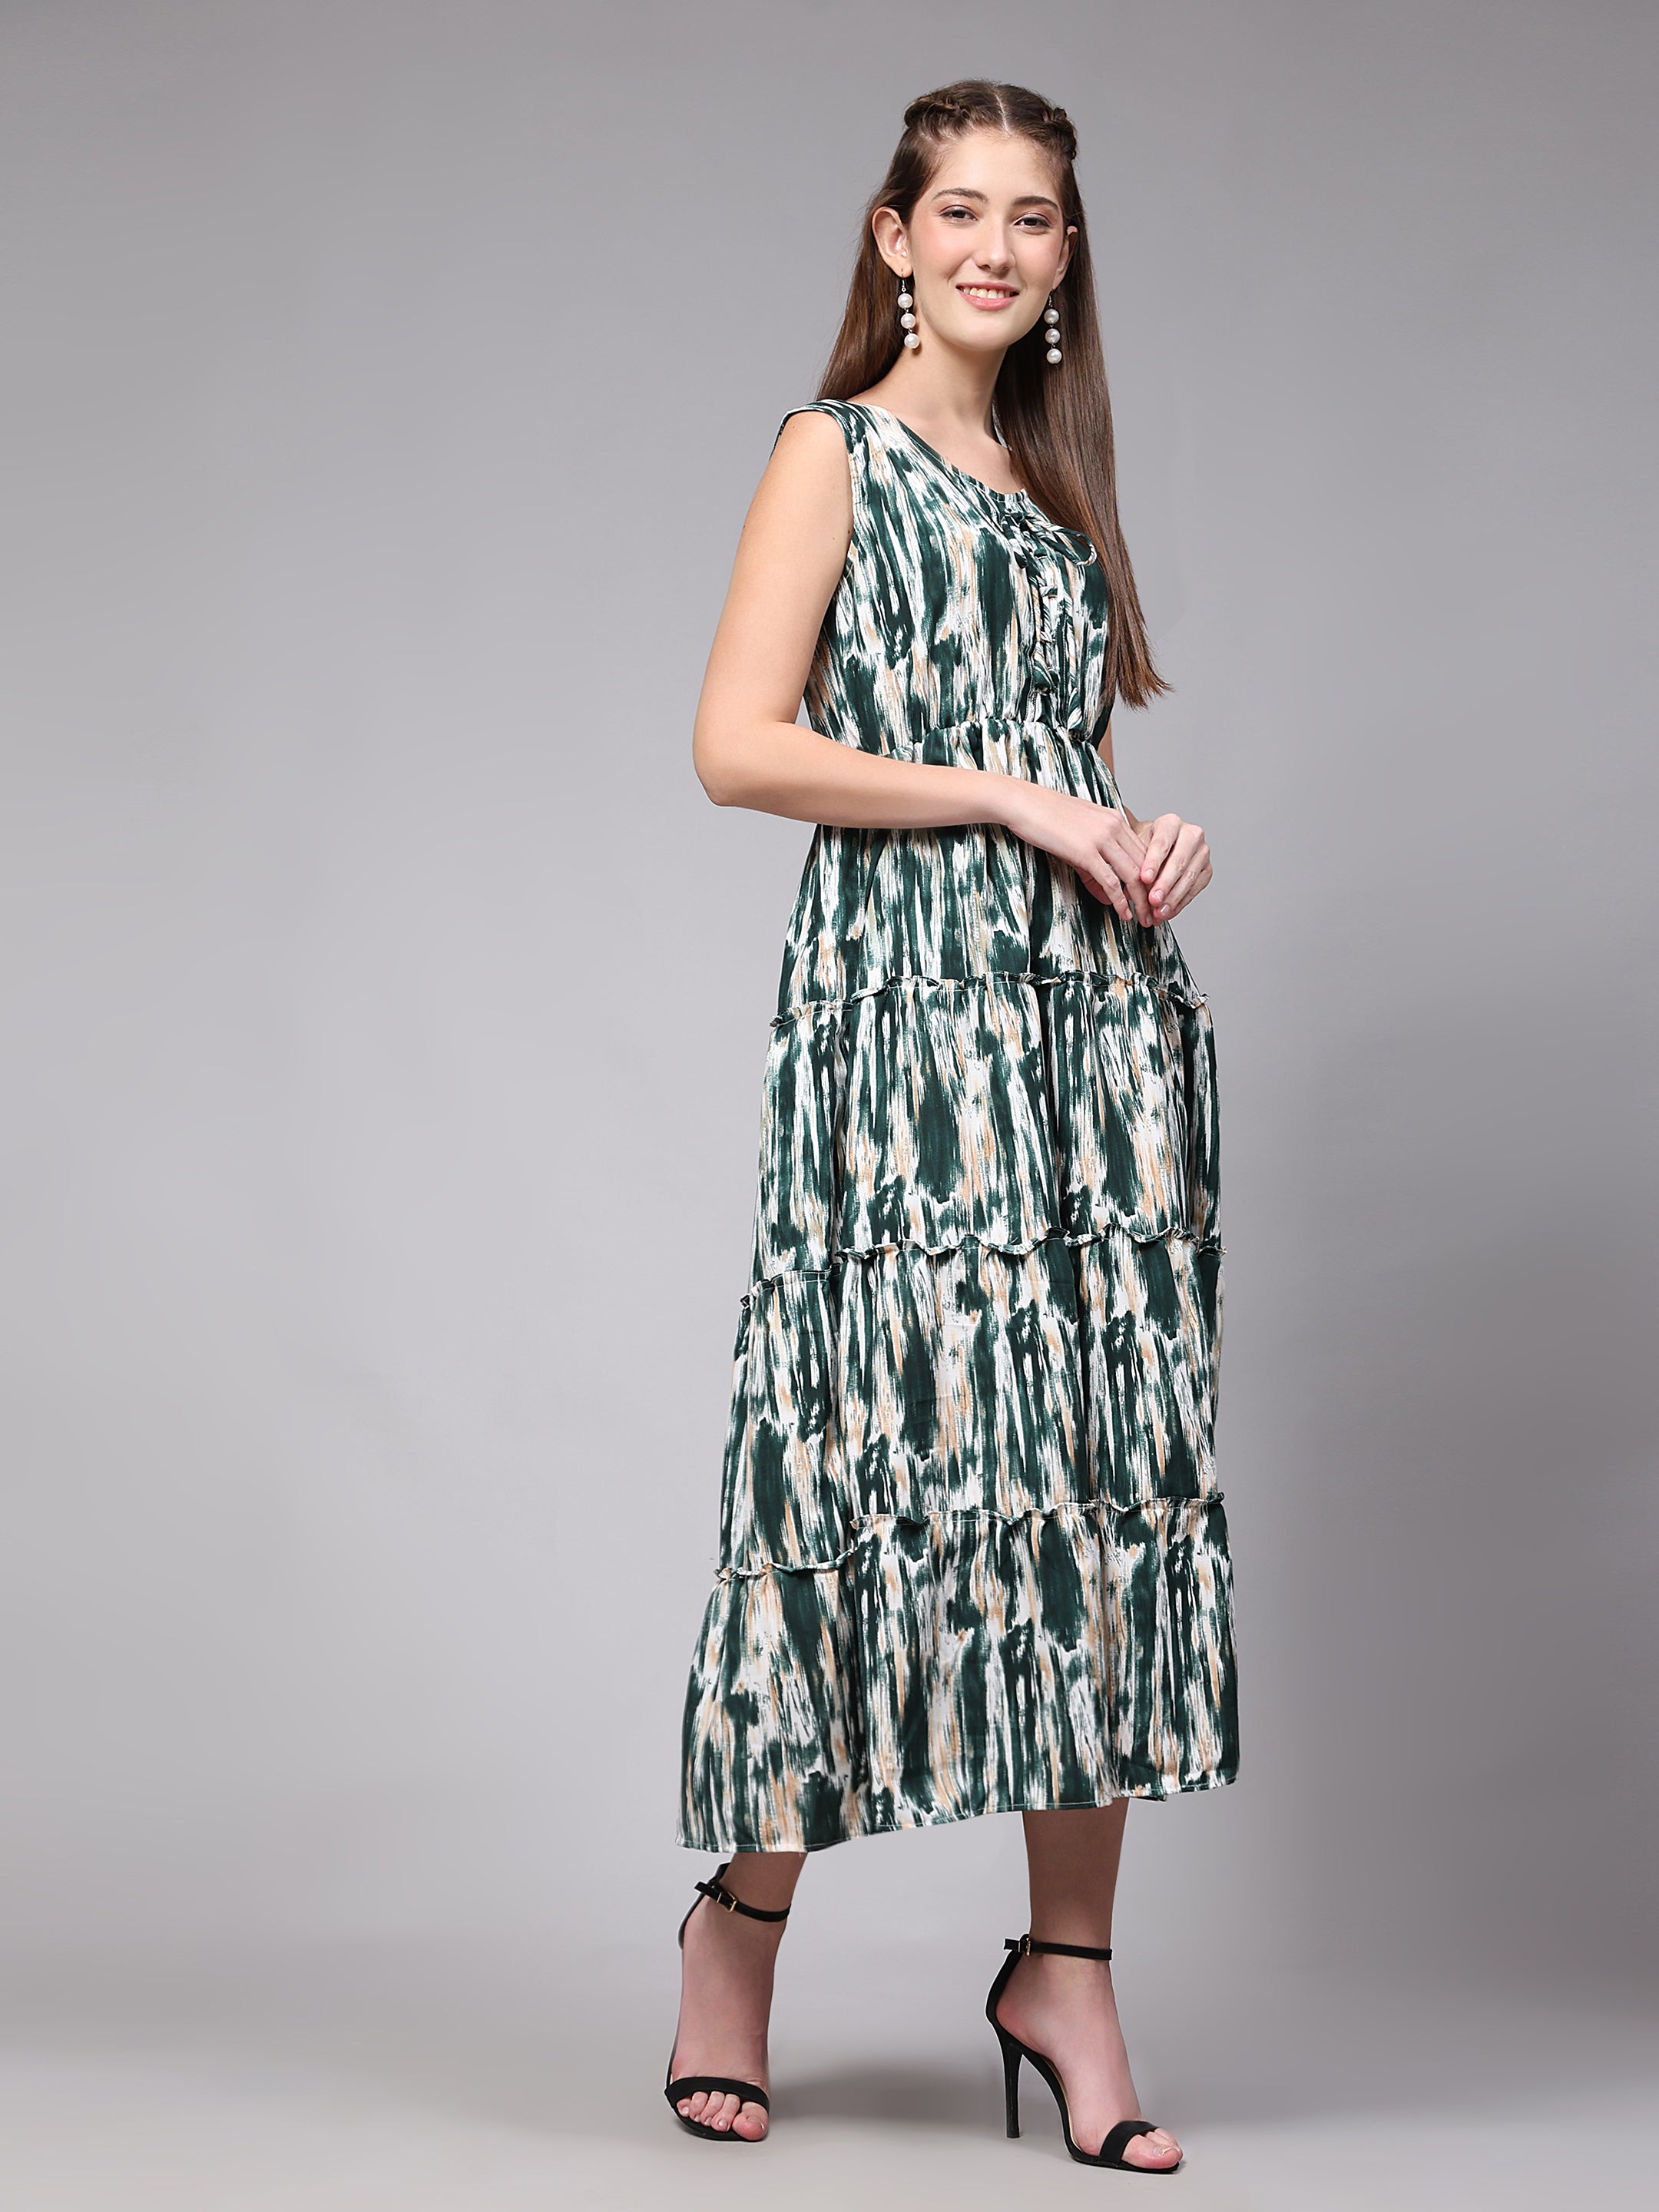 Tie Dyed Rayon Fancy Calf Length A-Line Sleeveless Dress For Women